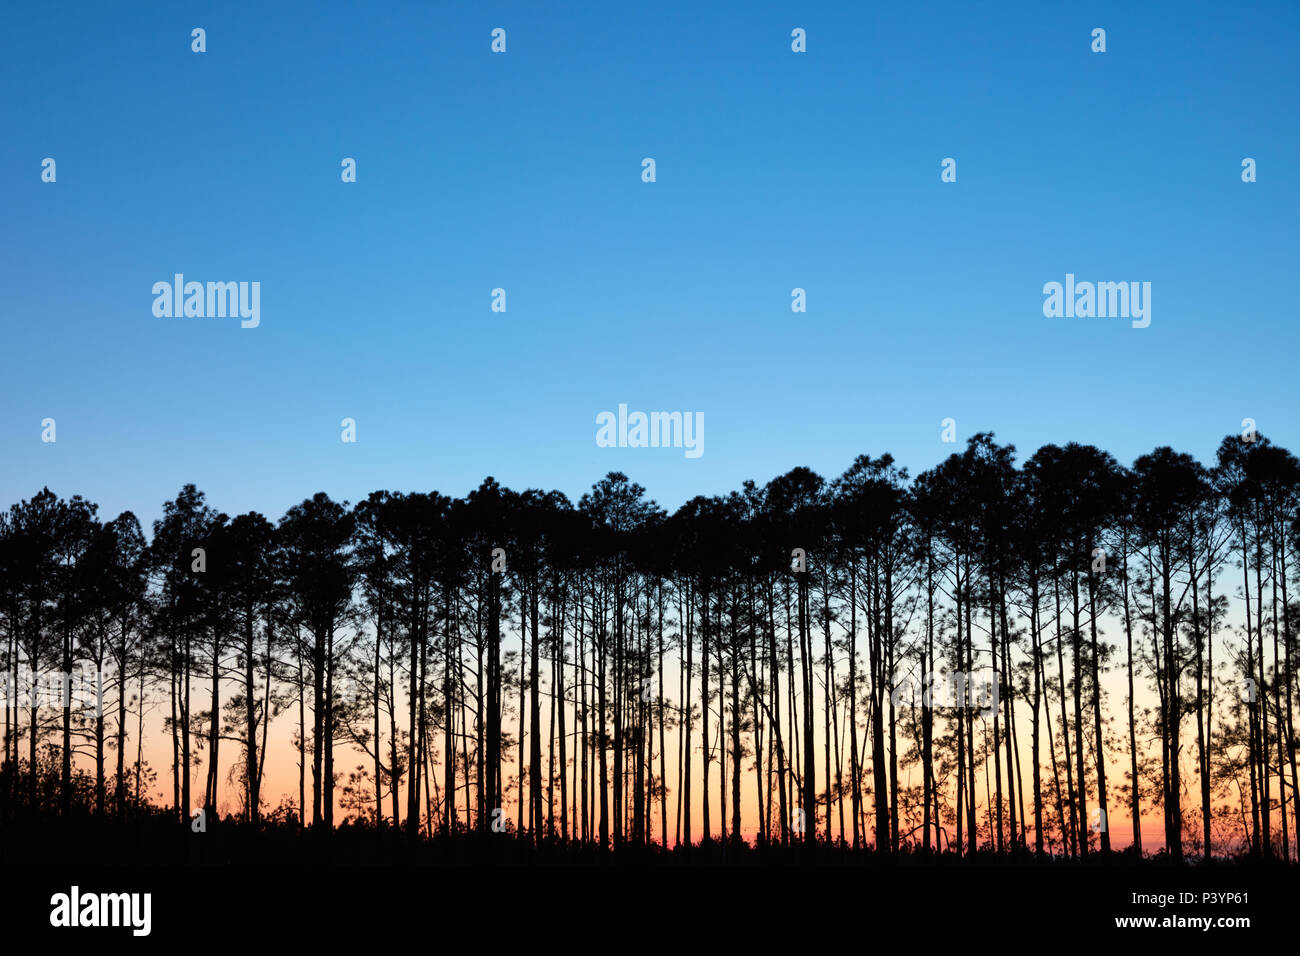 Sun setting behind a row of long leaf pine trees Stock Photo